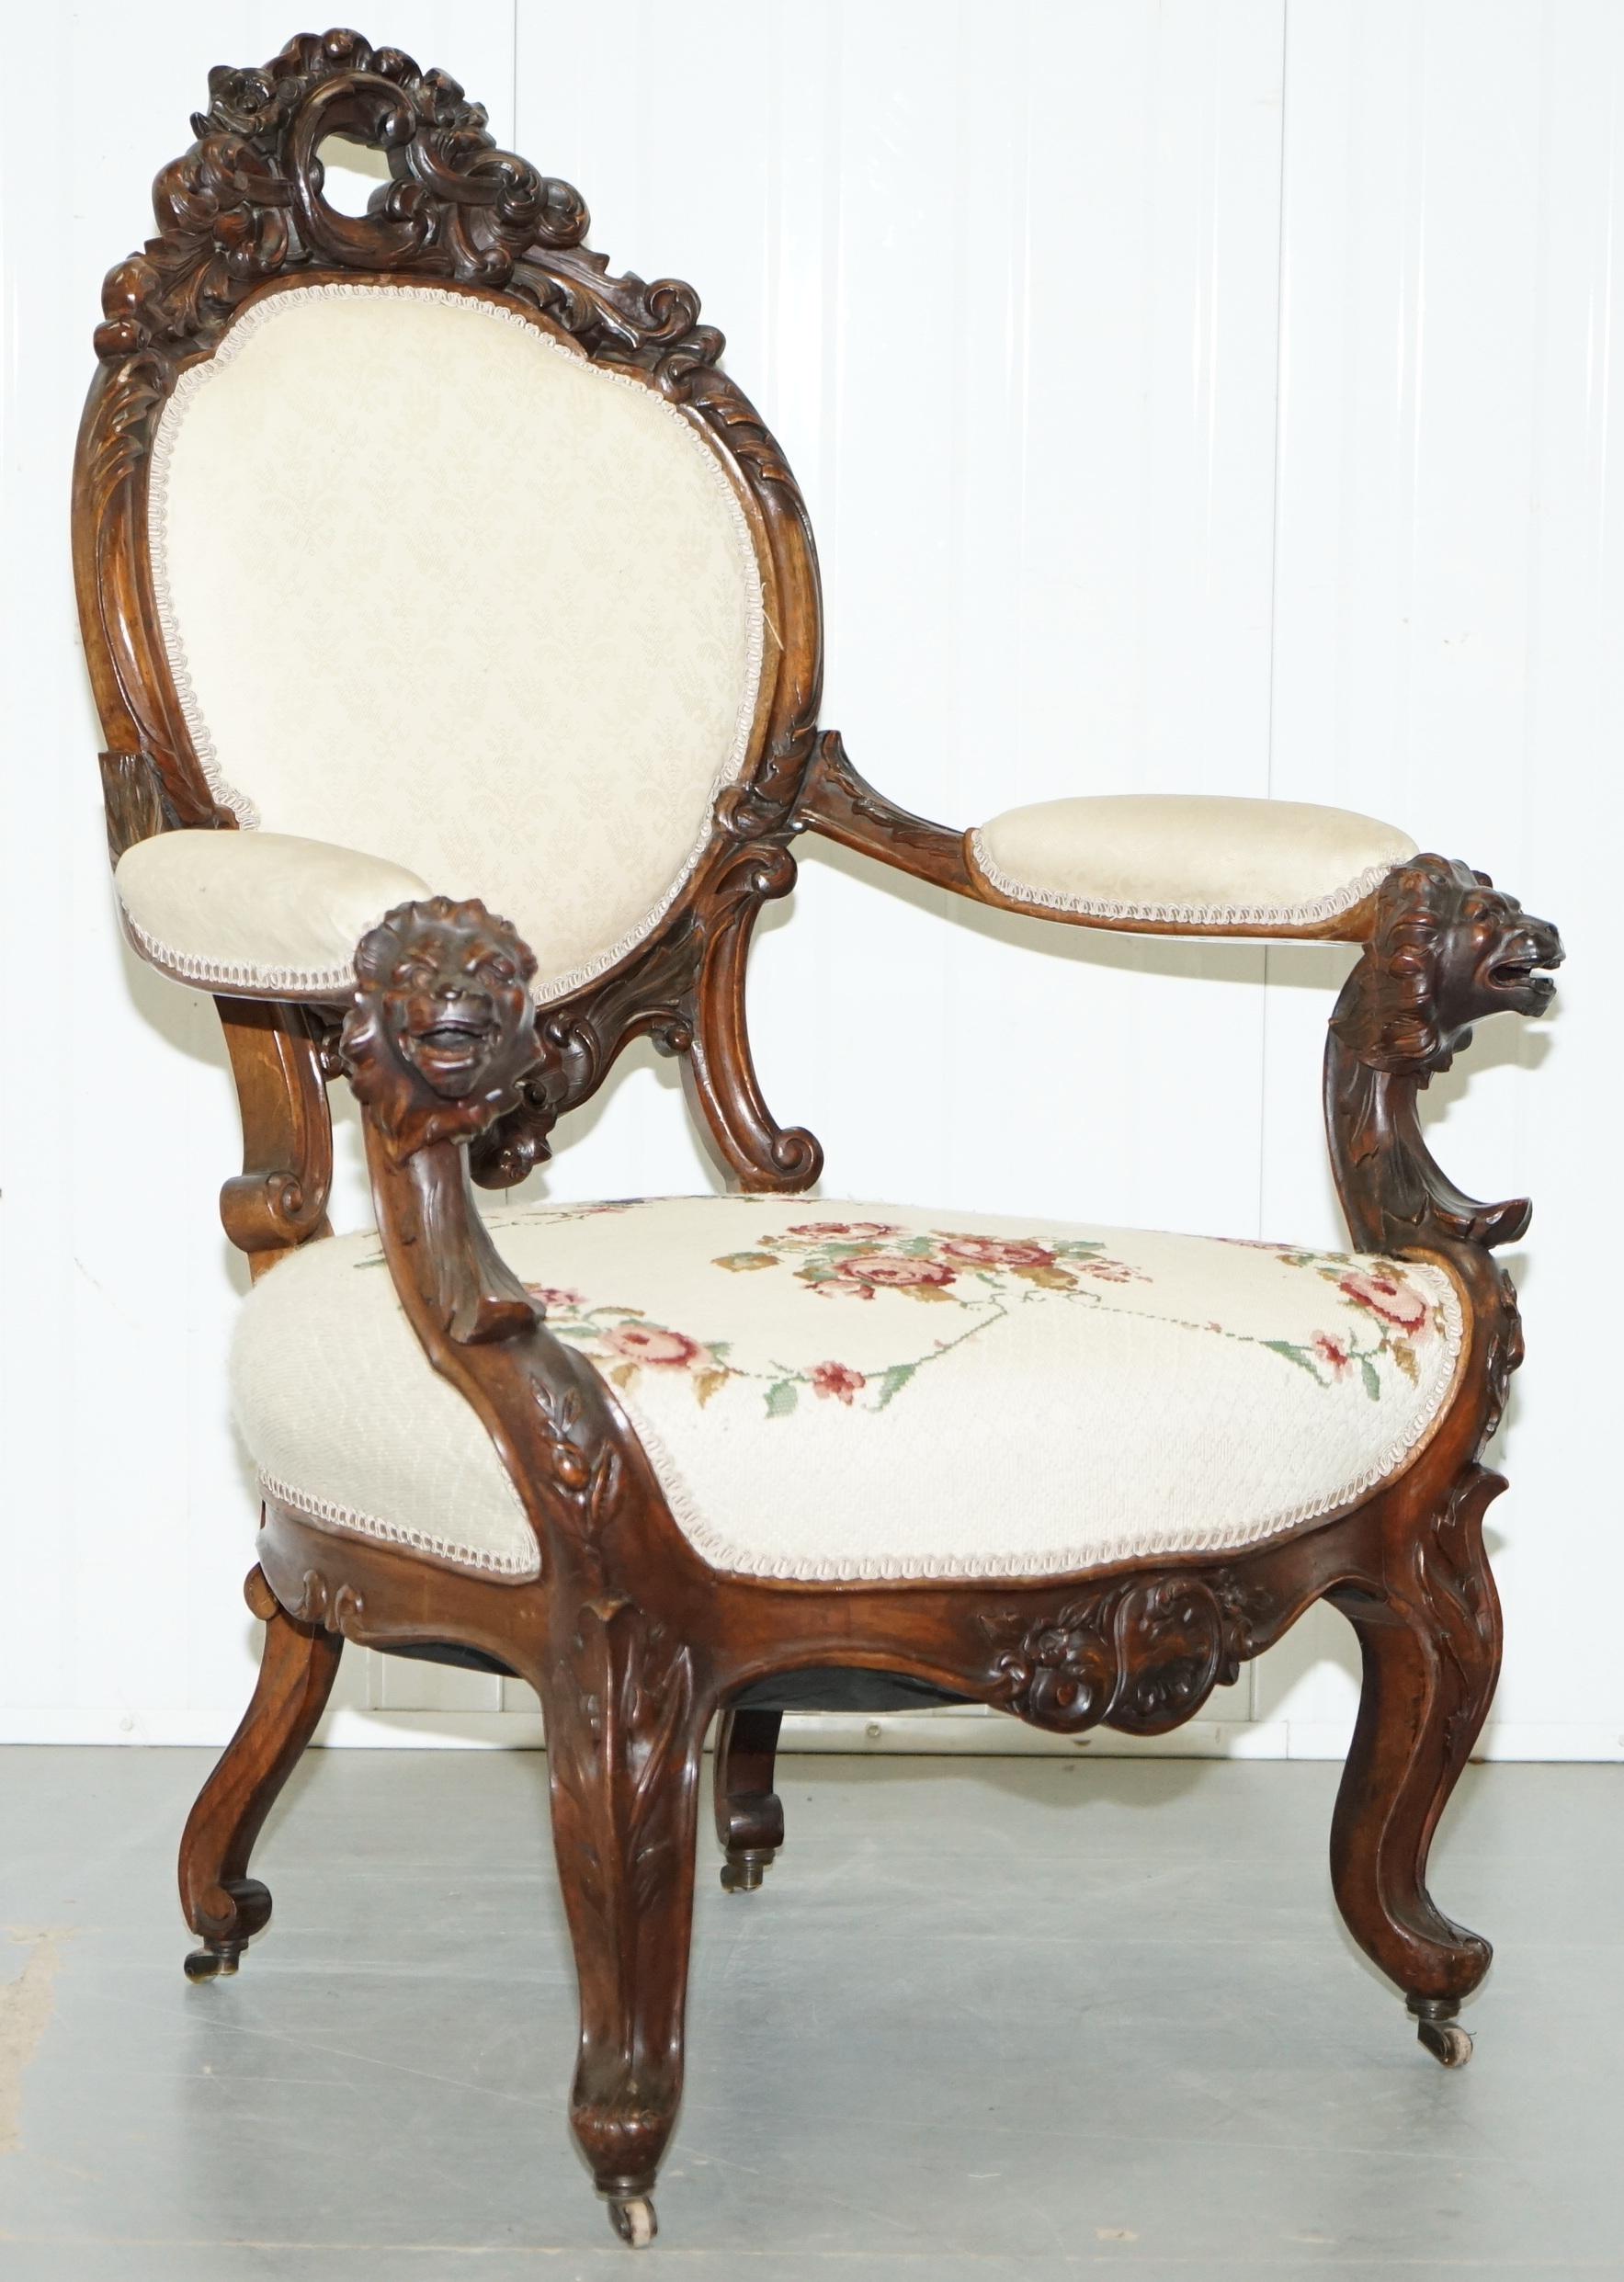 We are delighted to offer for sale this very rare Victorian hand carved show framed Salon armchair with Lion detailing and stamped castors

A good find, its rare to come across show framed salon armchairs with carving this ornate and in walnut